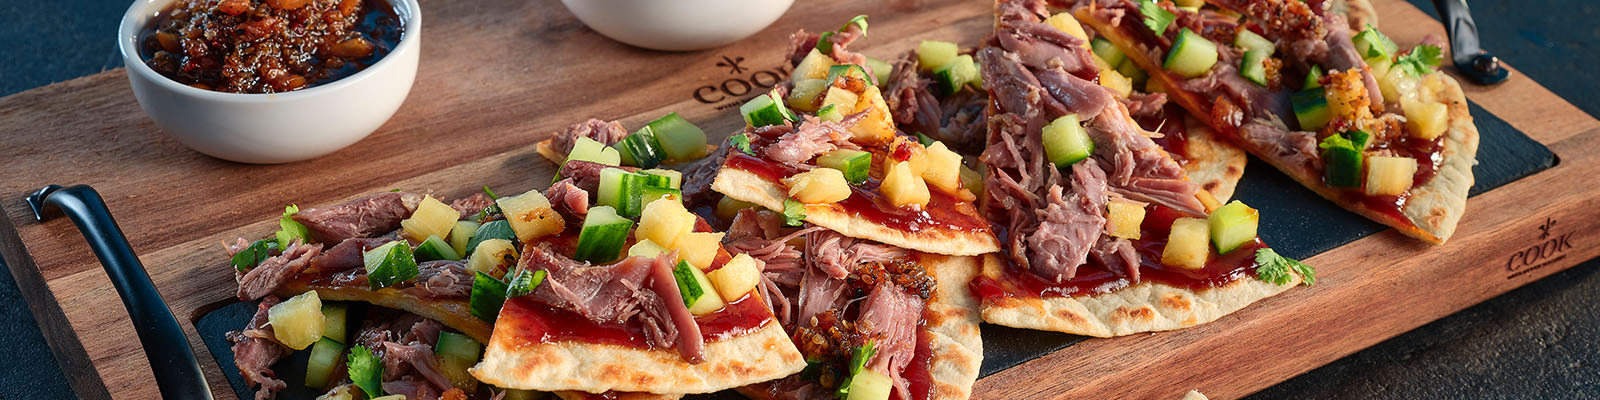 Neven Maguire's Spicy Asian Duck & Pineapple Triangles 